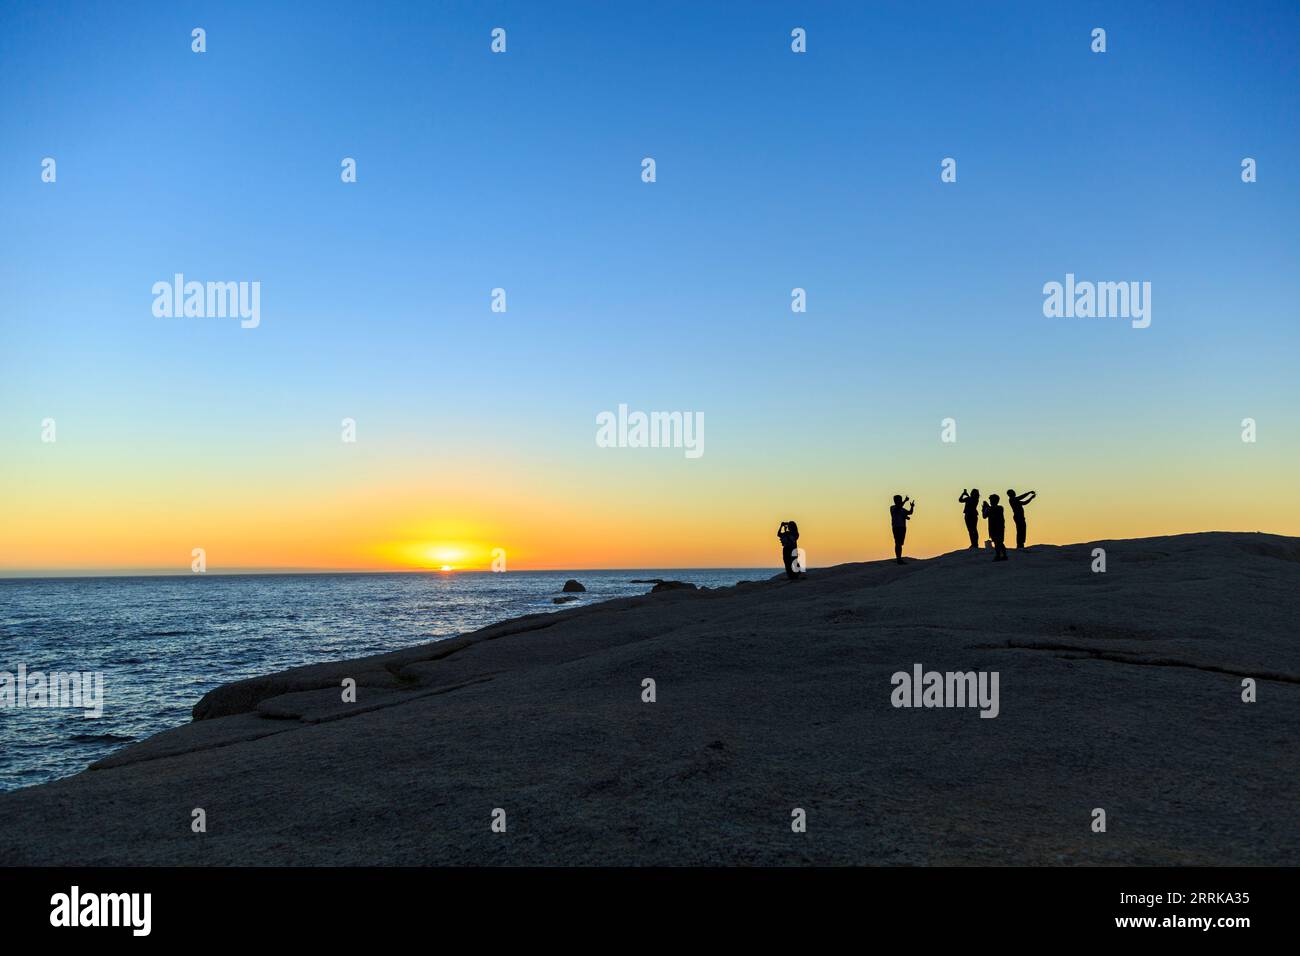 South Africa, Cape Town, sunset over the sea, rocks, silhouettes of a group of people taking selfies, Stock Photo